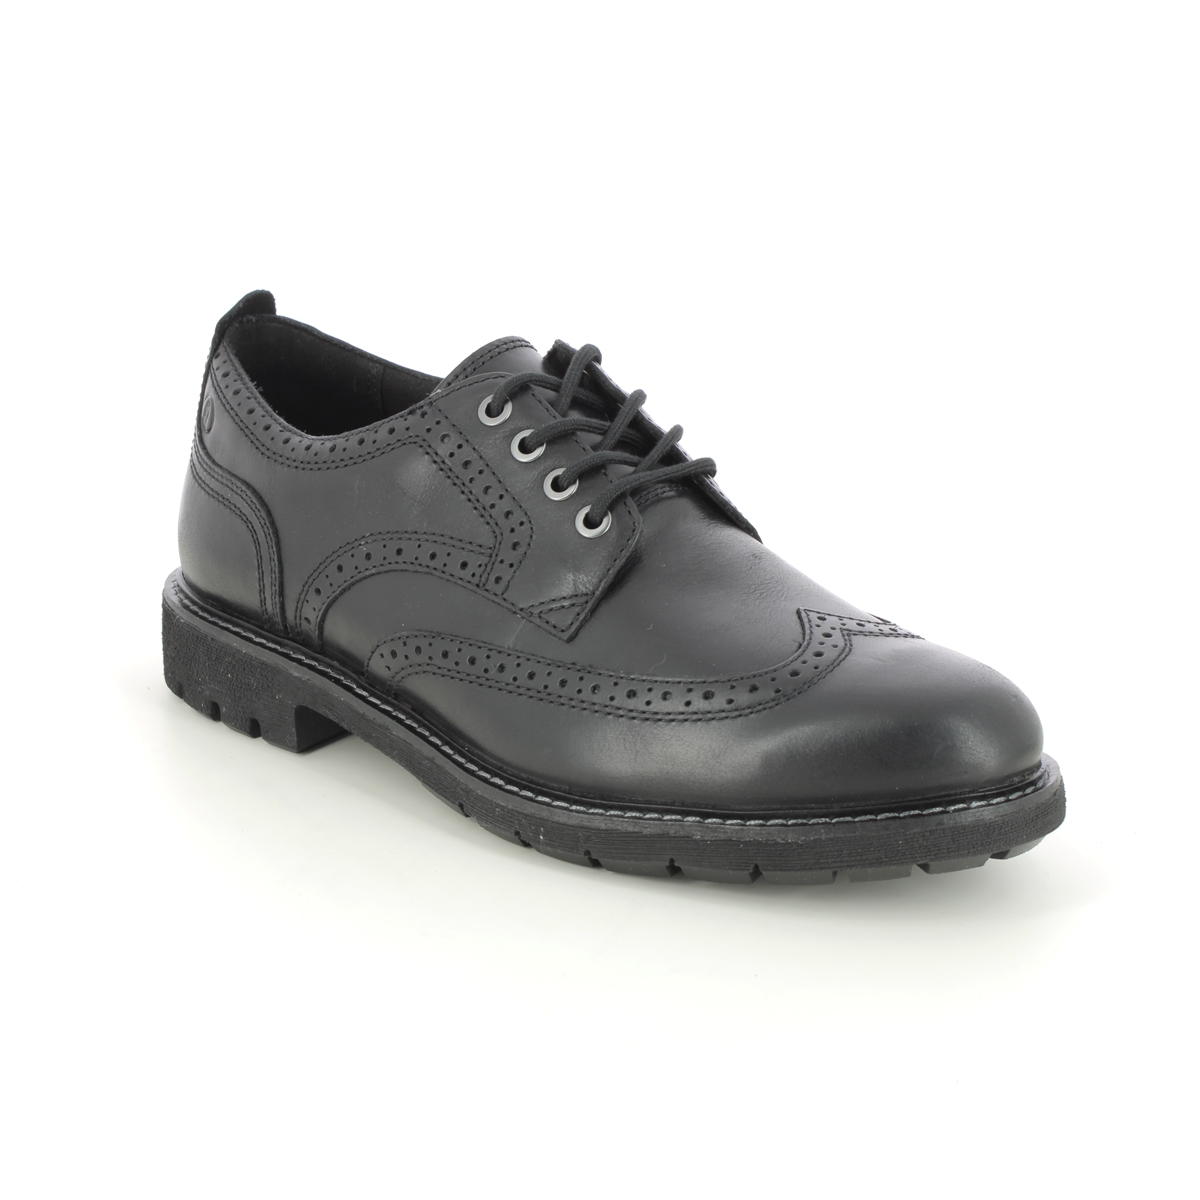 Clarks Batcombe Far Wing Black Leather Mens Brogues 734387G In Size 9.5 In Plain Black Leather G Width Fitting